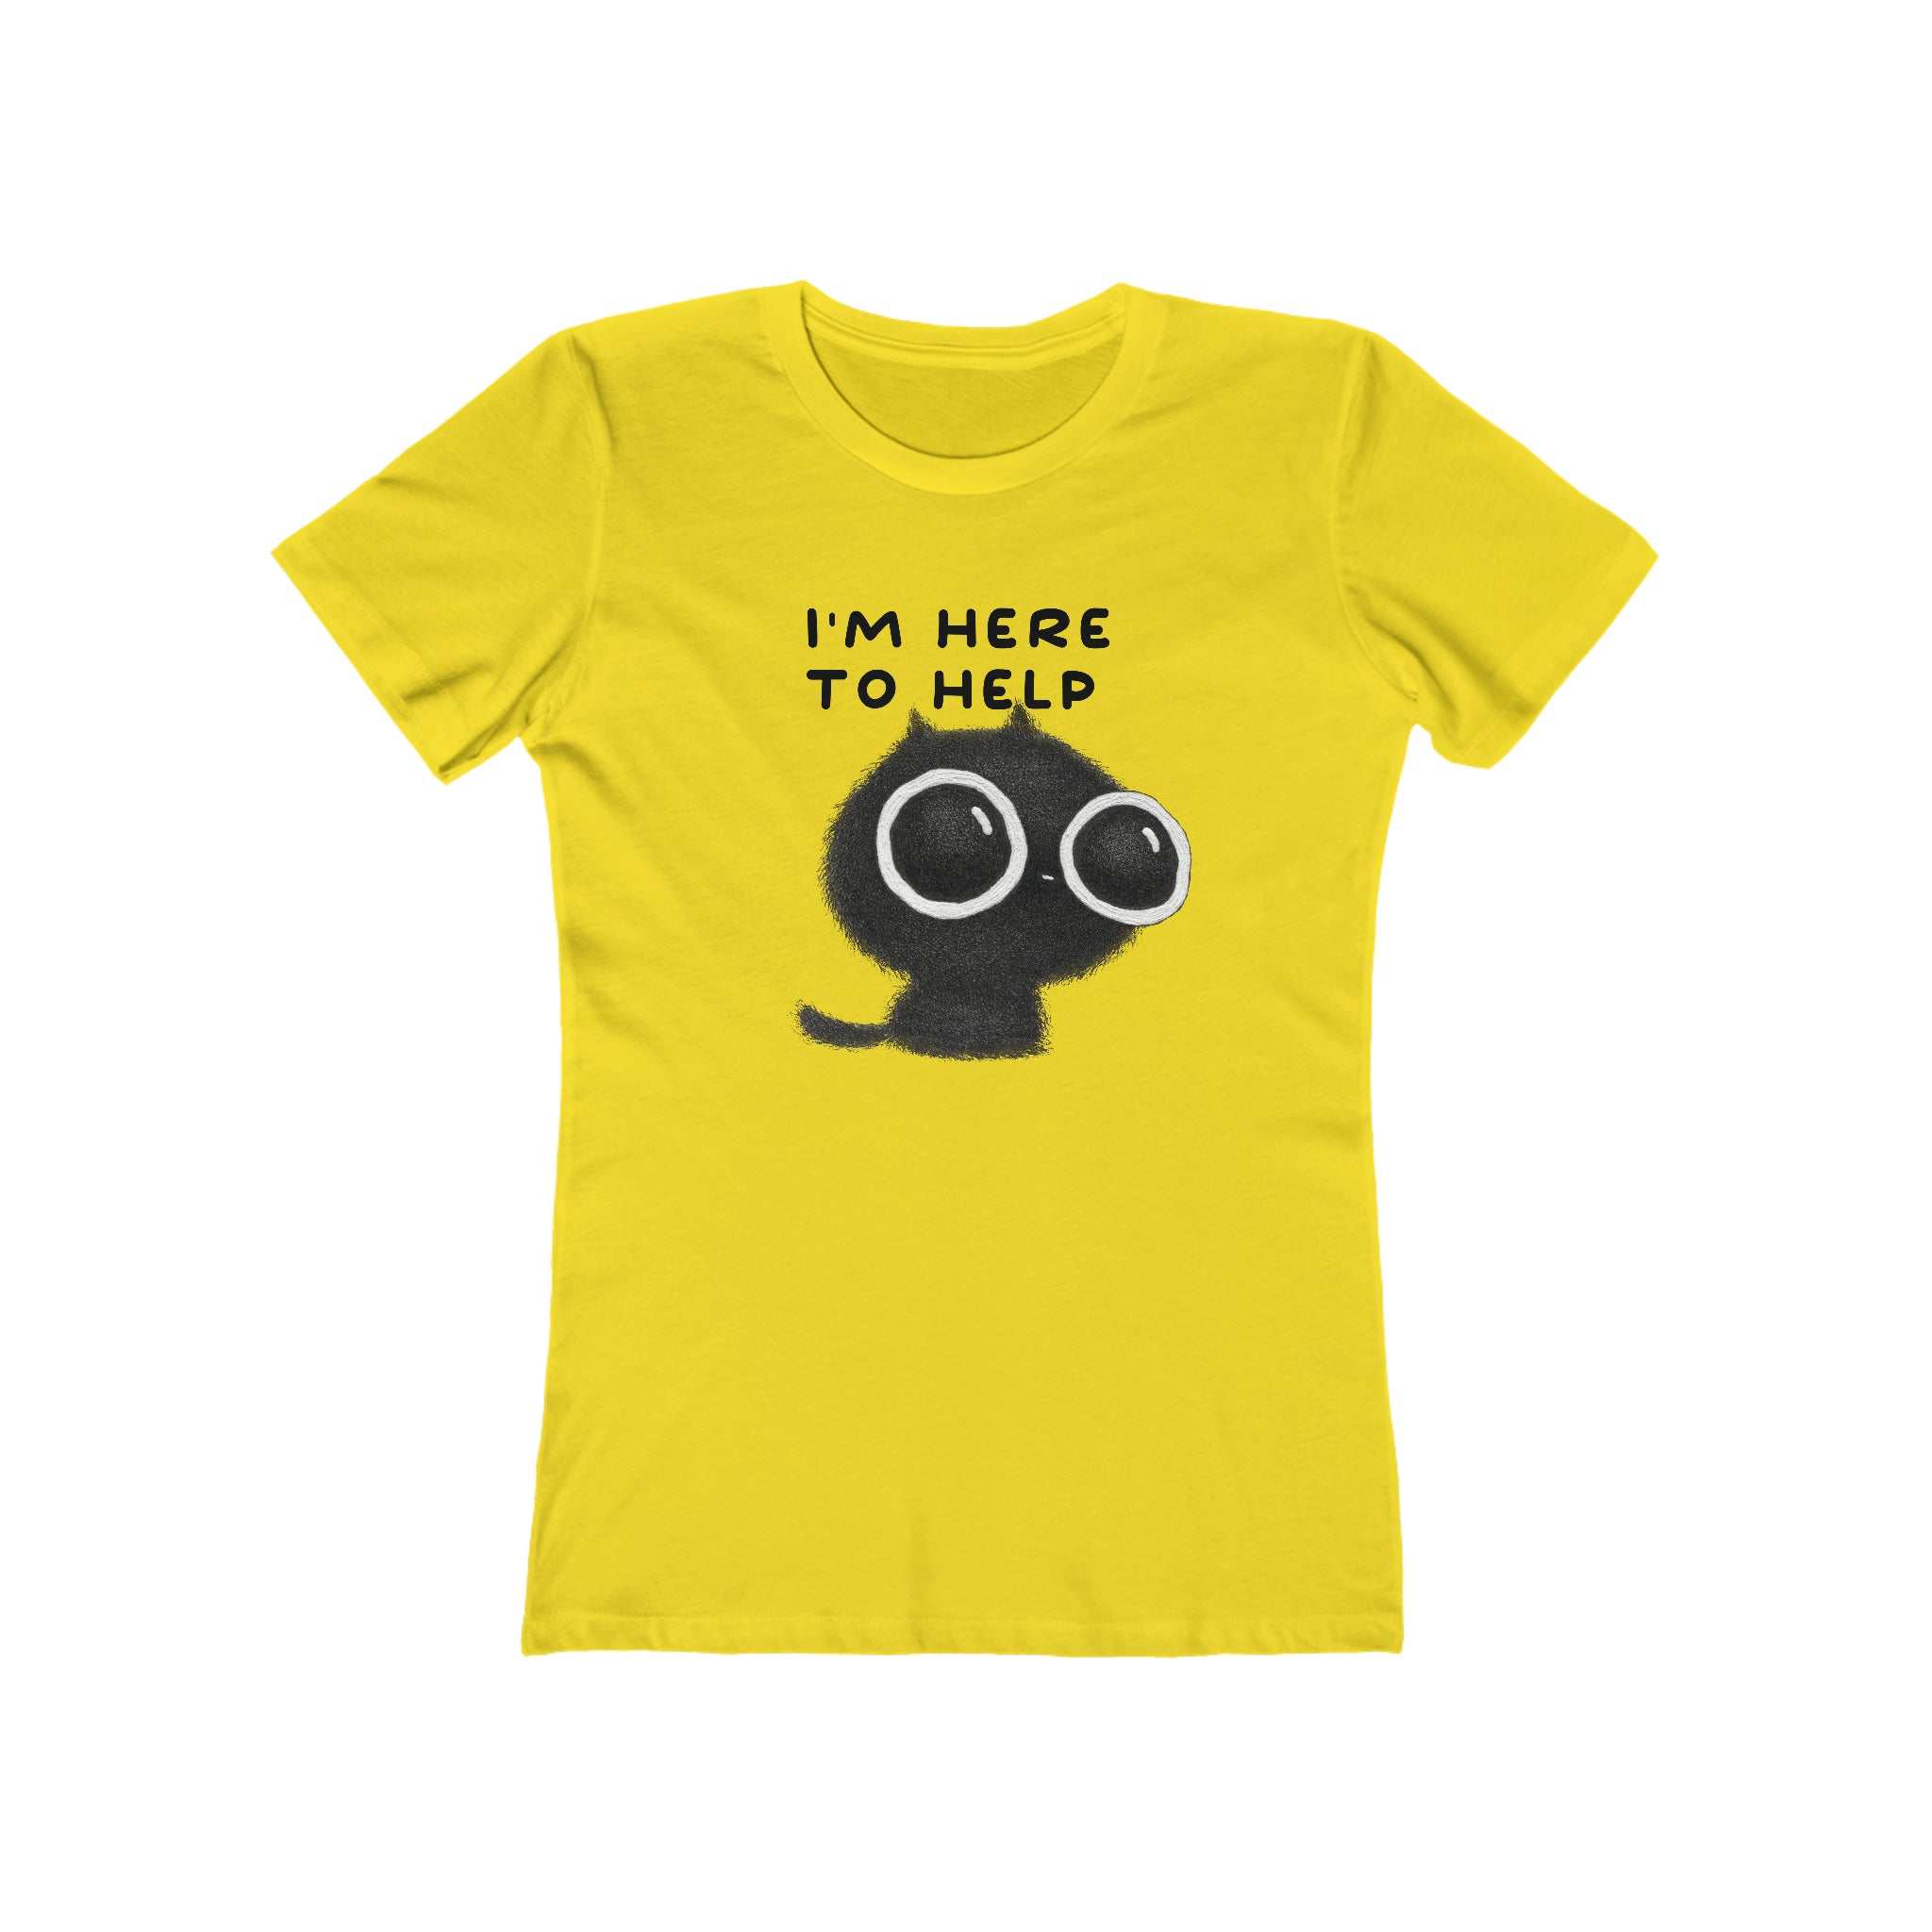 I'm Here to Help : Women's Cotton T-Shirt by Bella+Canvas